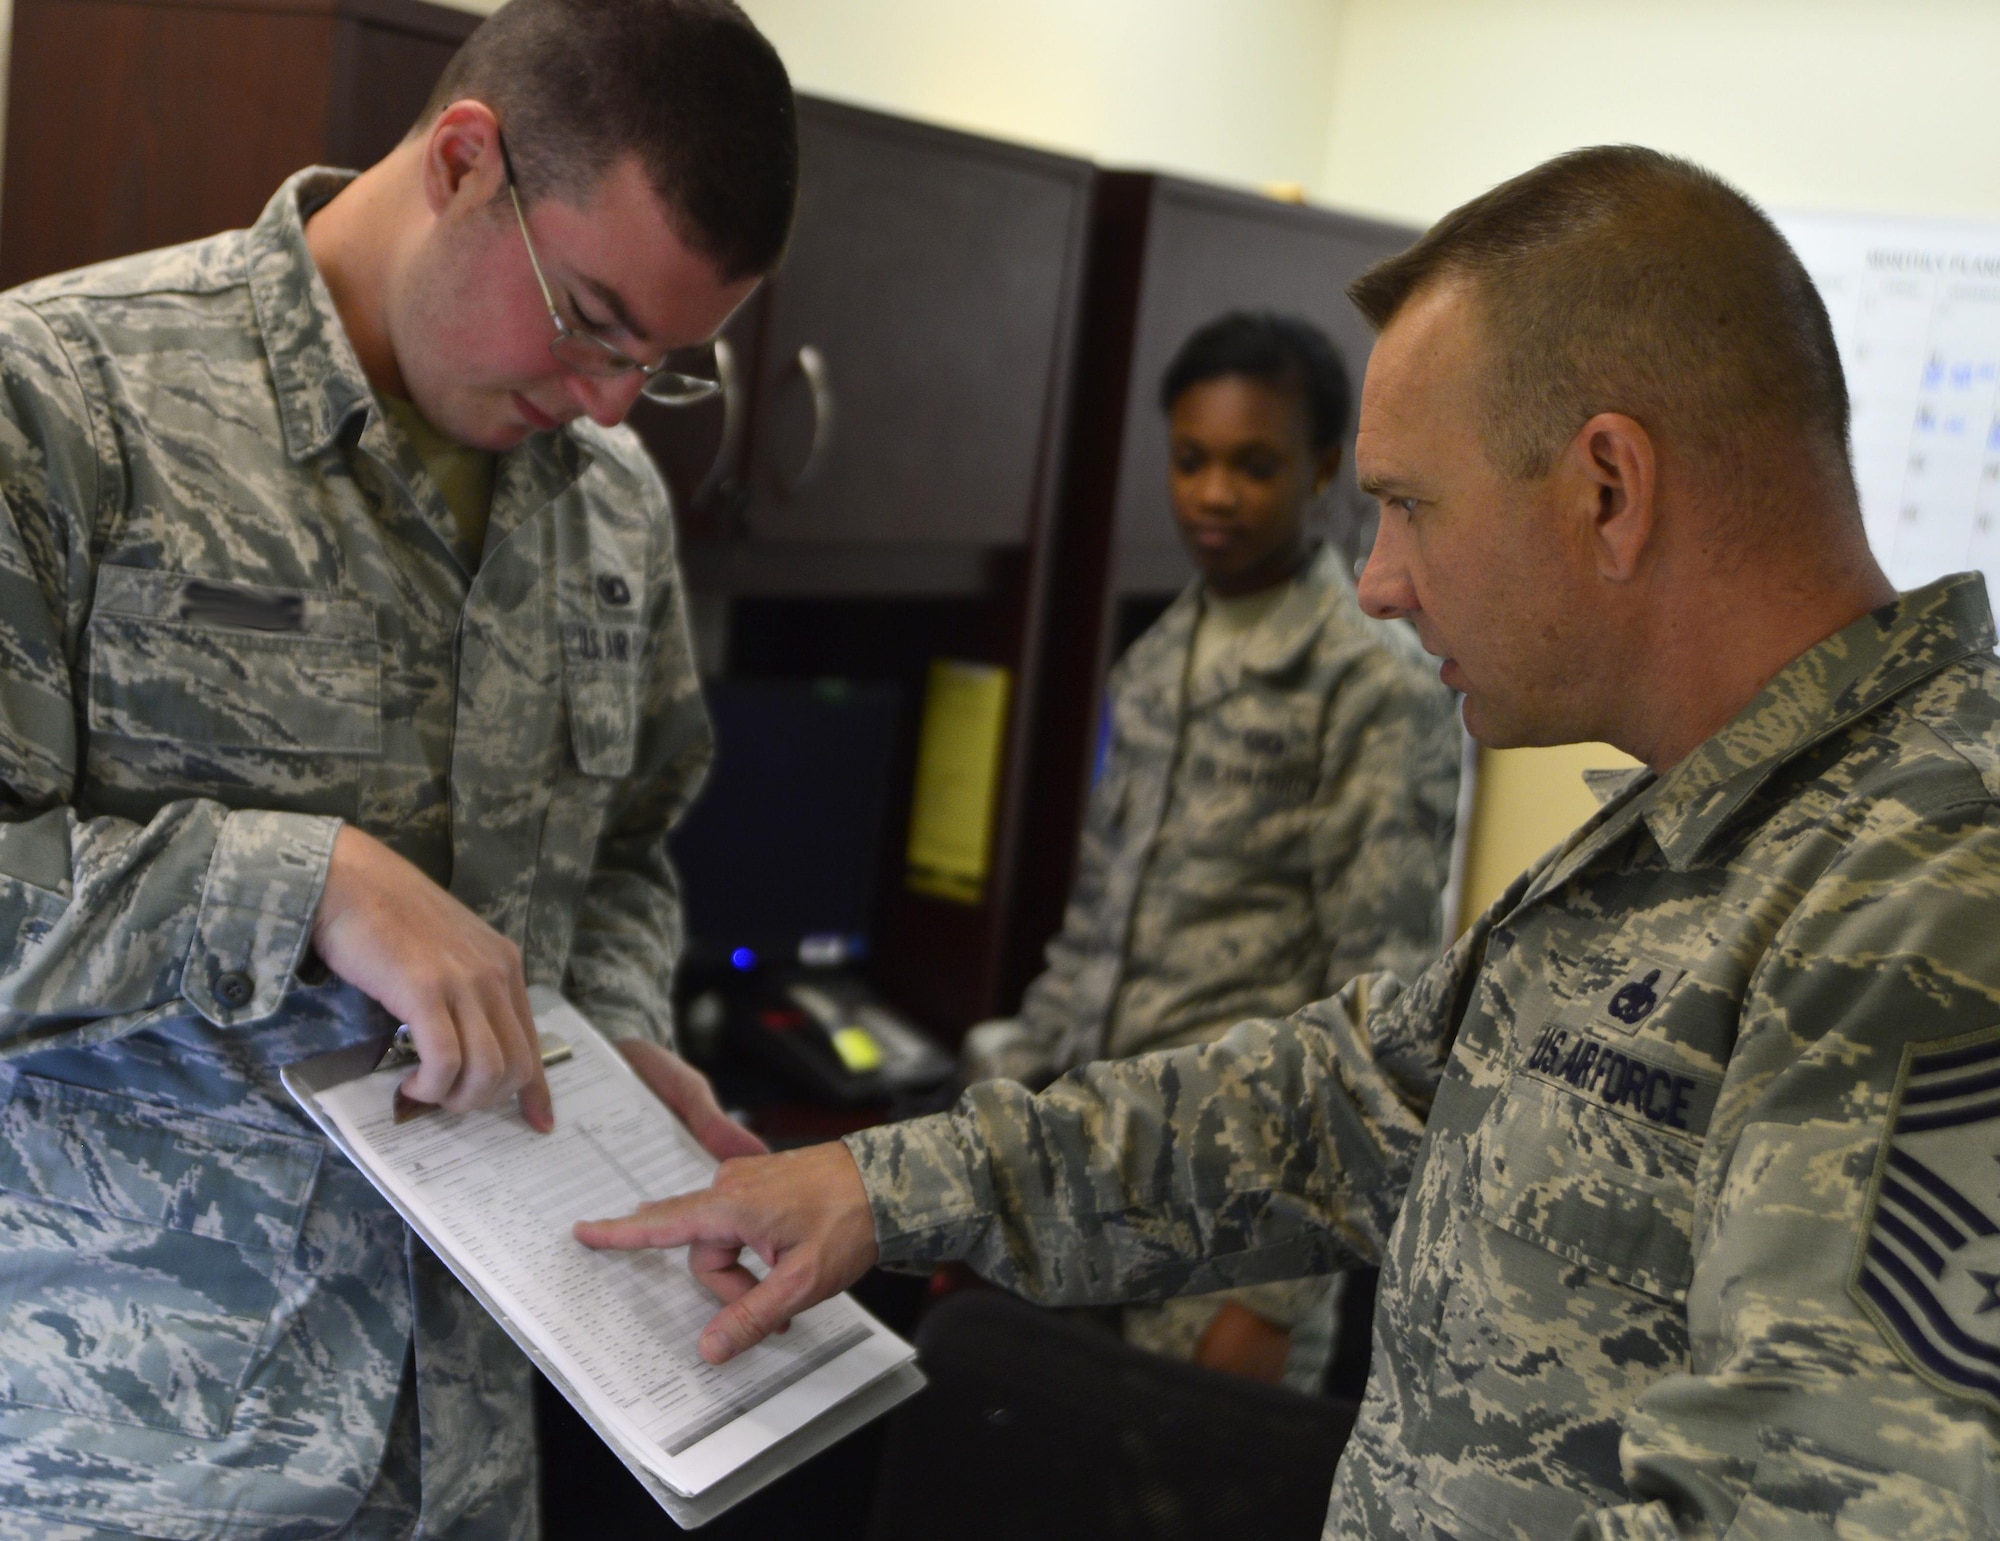 Senior Airman John, 22nd Reconnaissance Squadron squadron aviation resource management (SARM), explains SARM procedures to Chief Master Sgt. Michael Ditore, 432nd Wing/432nd Air Expeditionary Wing command chief, March 23, 2016 at Creech Air Force Base, Nevada. The chief learned about the ‘nitty gritty’ details of the Airmen’s jobs while ensuring the Airmen understood how important they are to the mission and the nation’s security. (U.S. Air Force photo by Senior Airman Christian Clausen/Released)